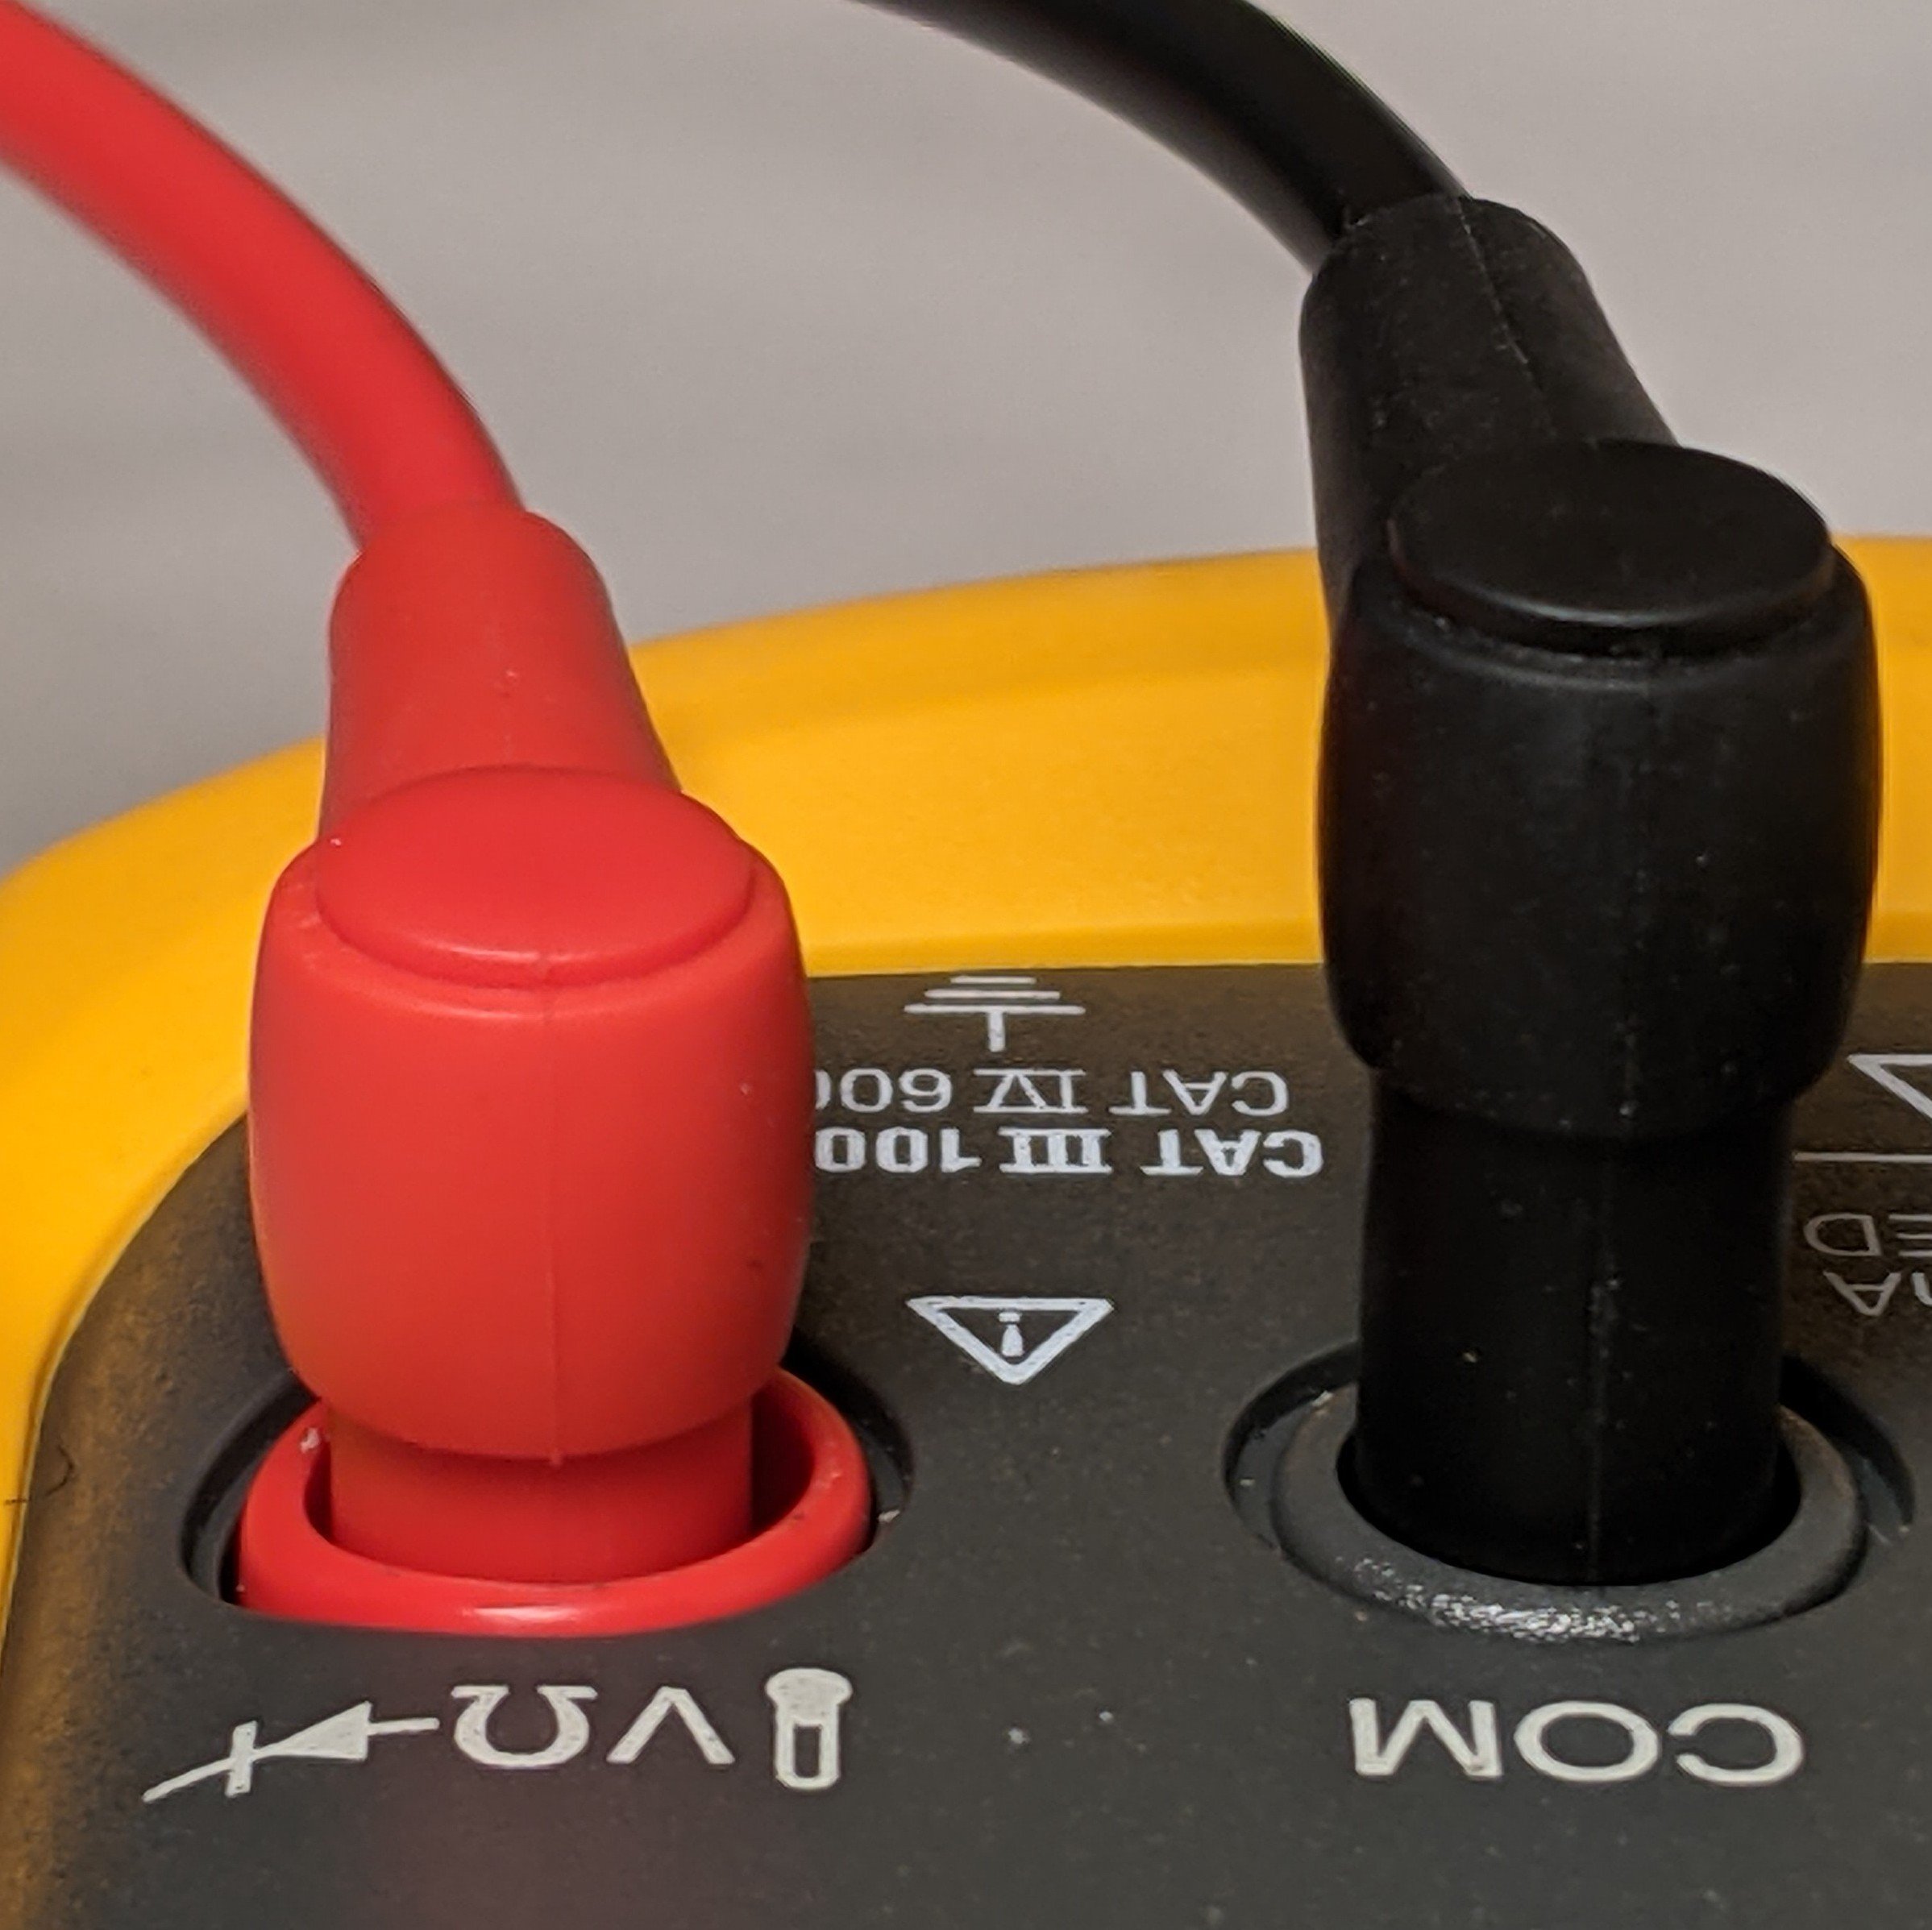 Fluke 8x V Safety Notice - Offset Black Test Lead with Red Lead Inserted